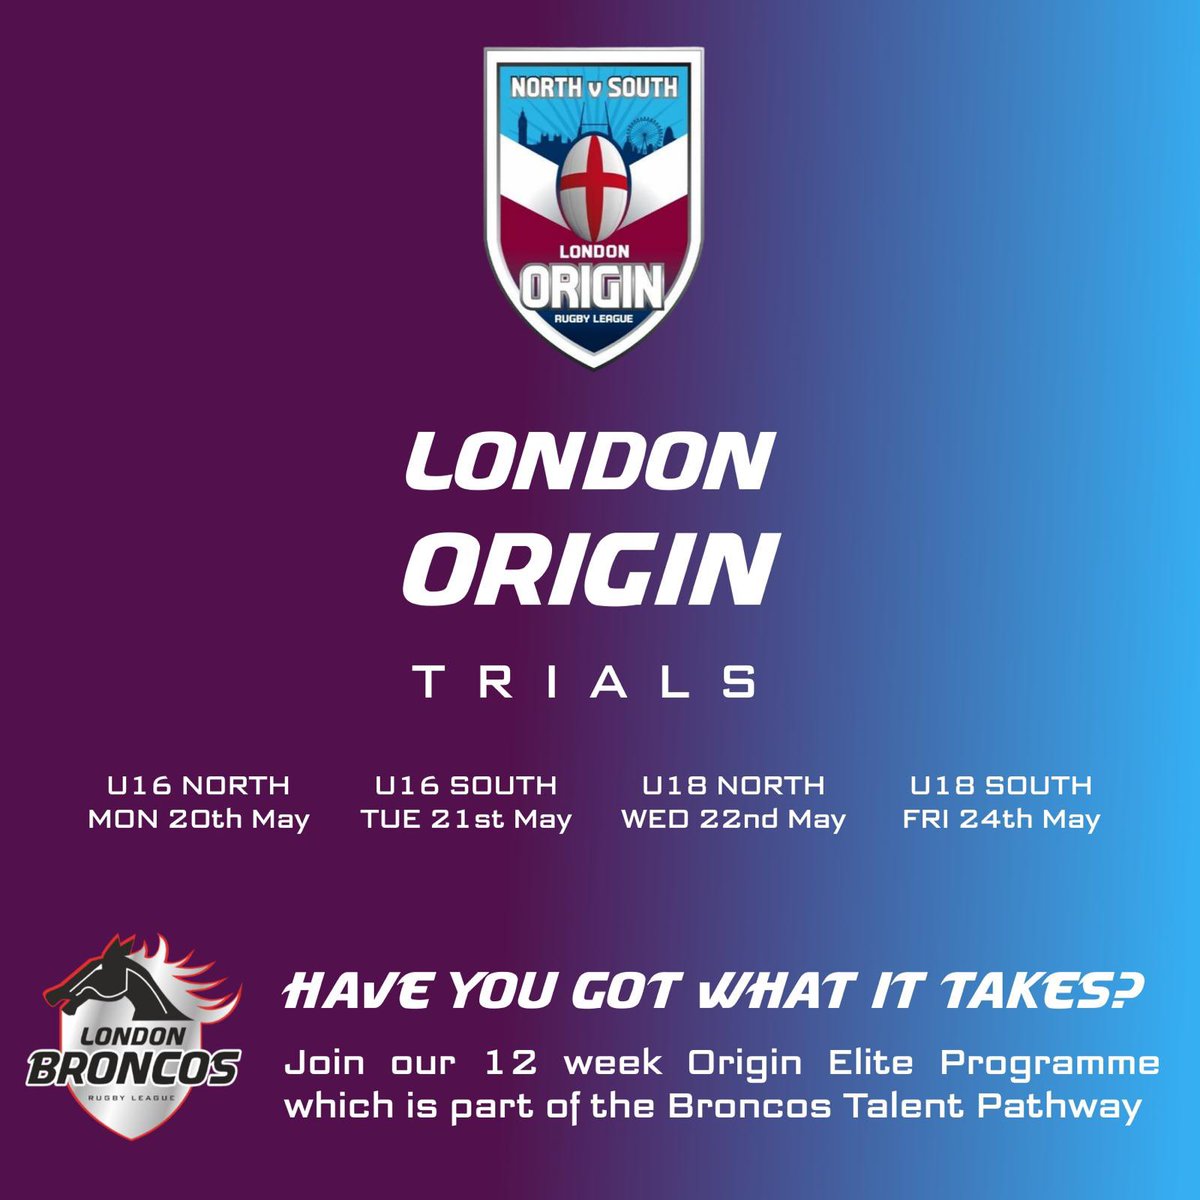 🗣️| 𝐎𝐑𝐈𝐆𝐈𝐍 𝐄𝐋𝐈𝐓𝐄 𝐏𝐑𝐎𝐆𝐑𝐀𝐌𝐌𝐄!!

London Broncos are pleased to announce the launch of our Origin Elite Programme.

We are holding trials for both North and South Squads at both U16 & U18 Age Groups. 

Full information👇

🔗 londonbroncosrl.com/london-broncos…

#WeAreLondon🏉